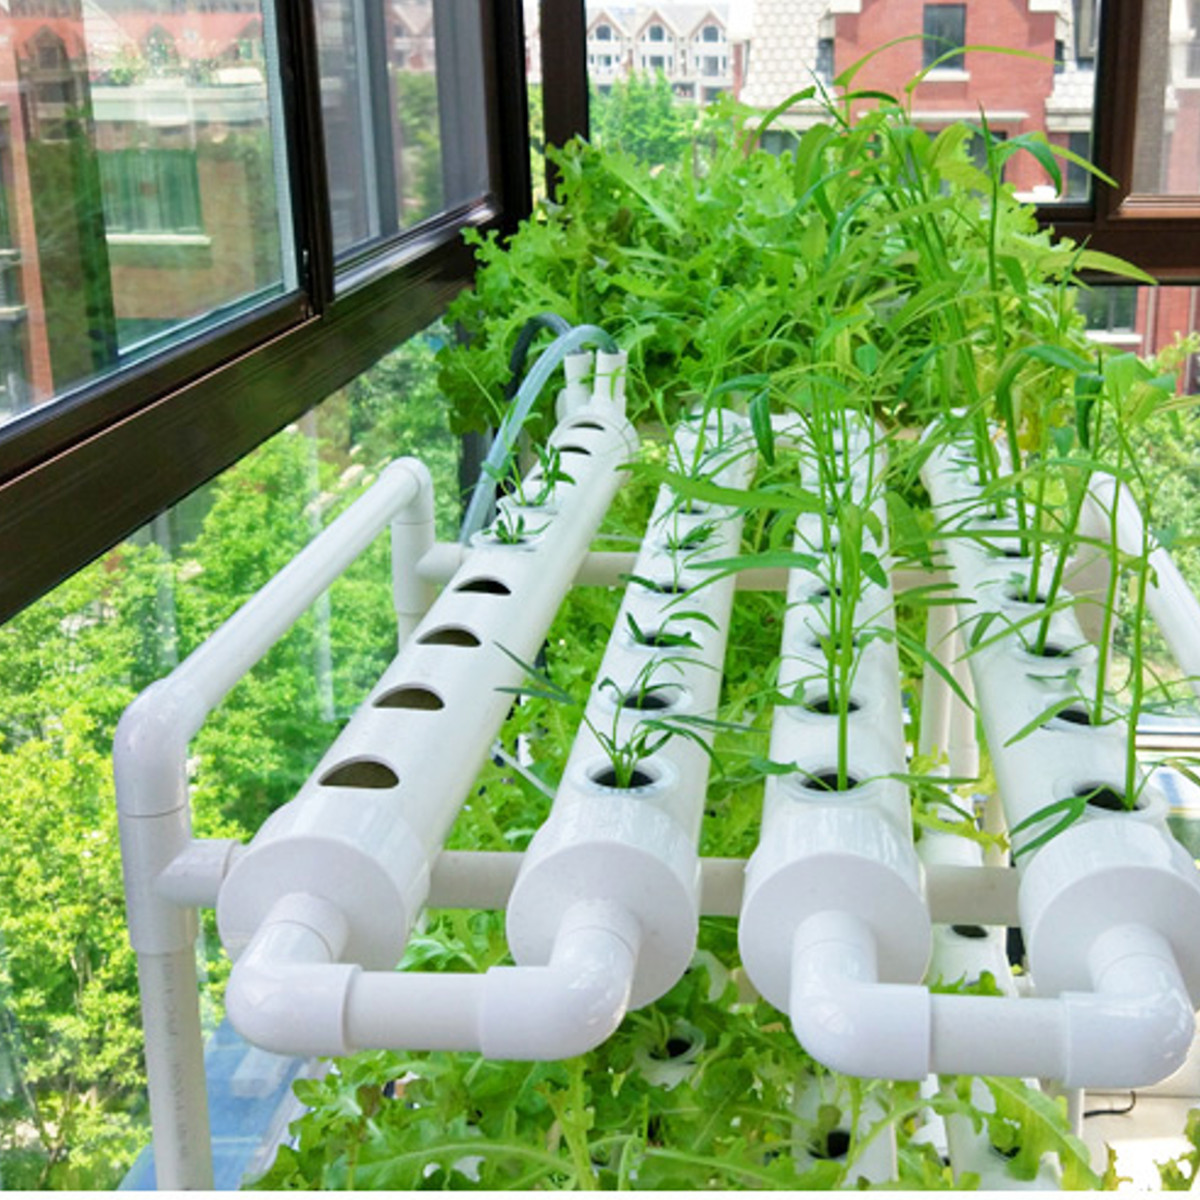 36 Holes Hydroponic Piping Site Grow Kit DIY Horizontal Flow DWC Deep Water Culture System Garden Vegetable 7